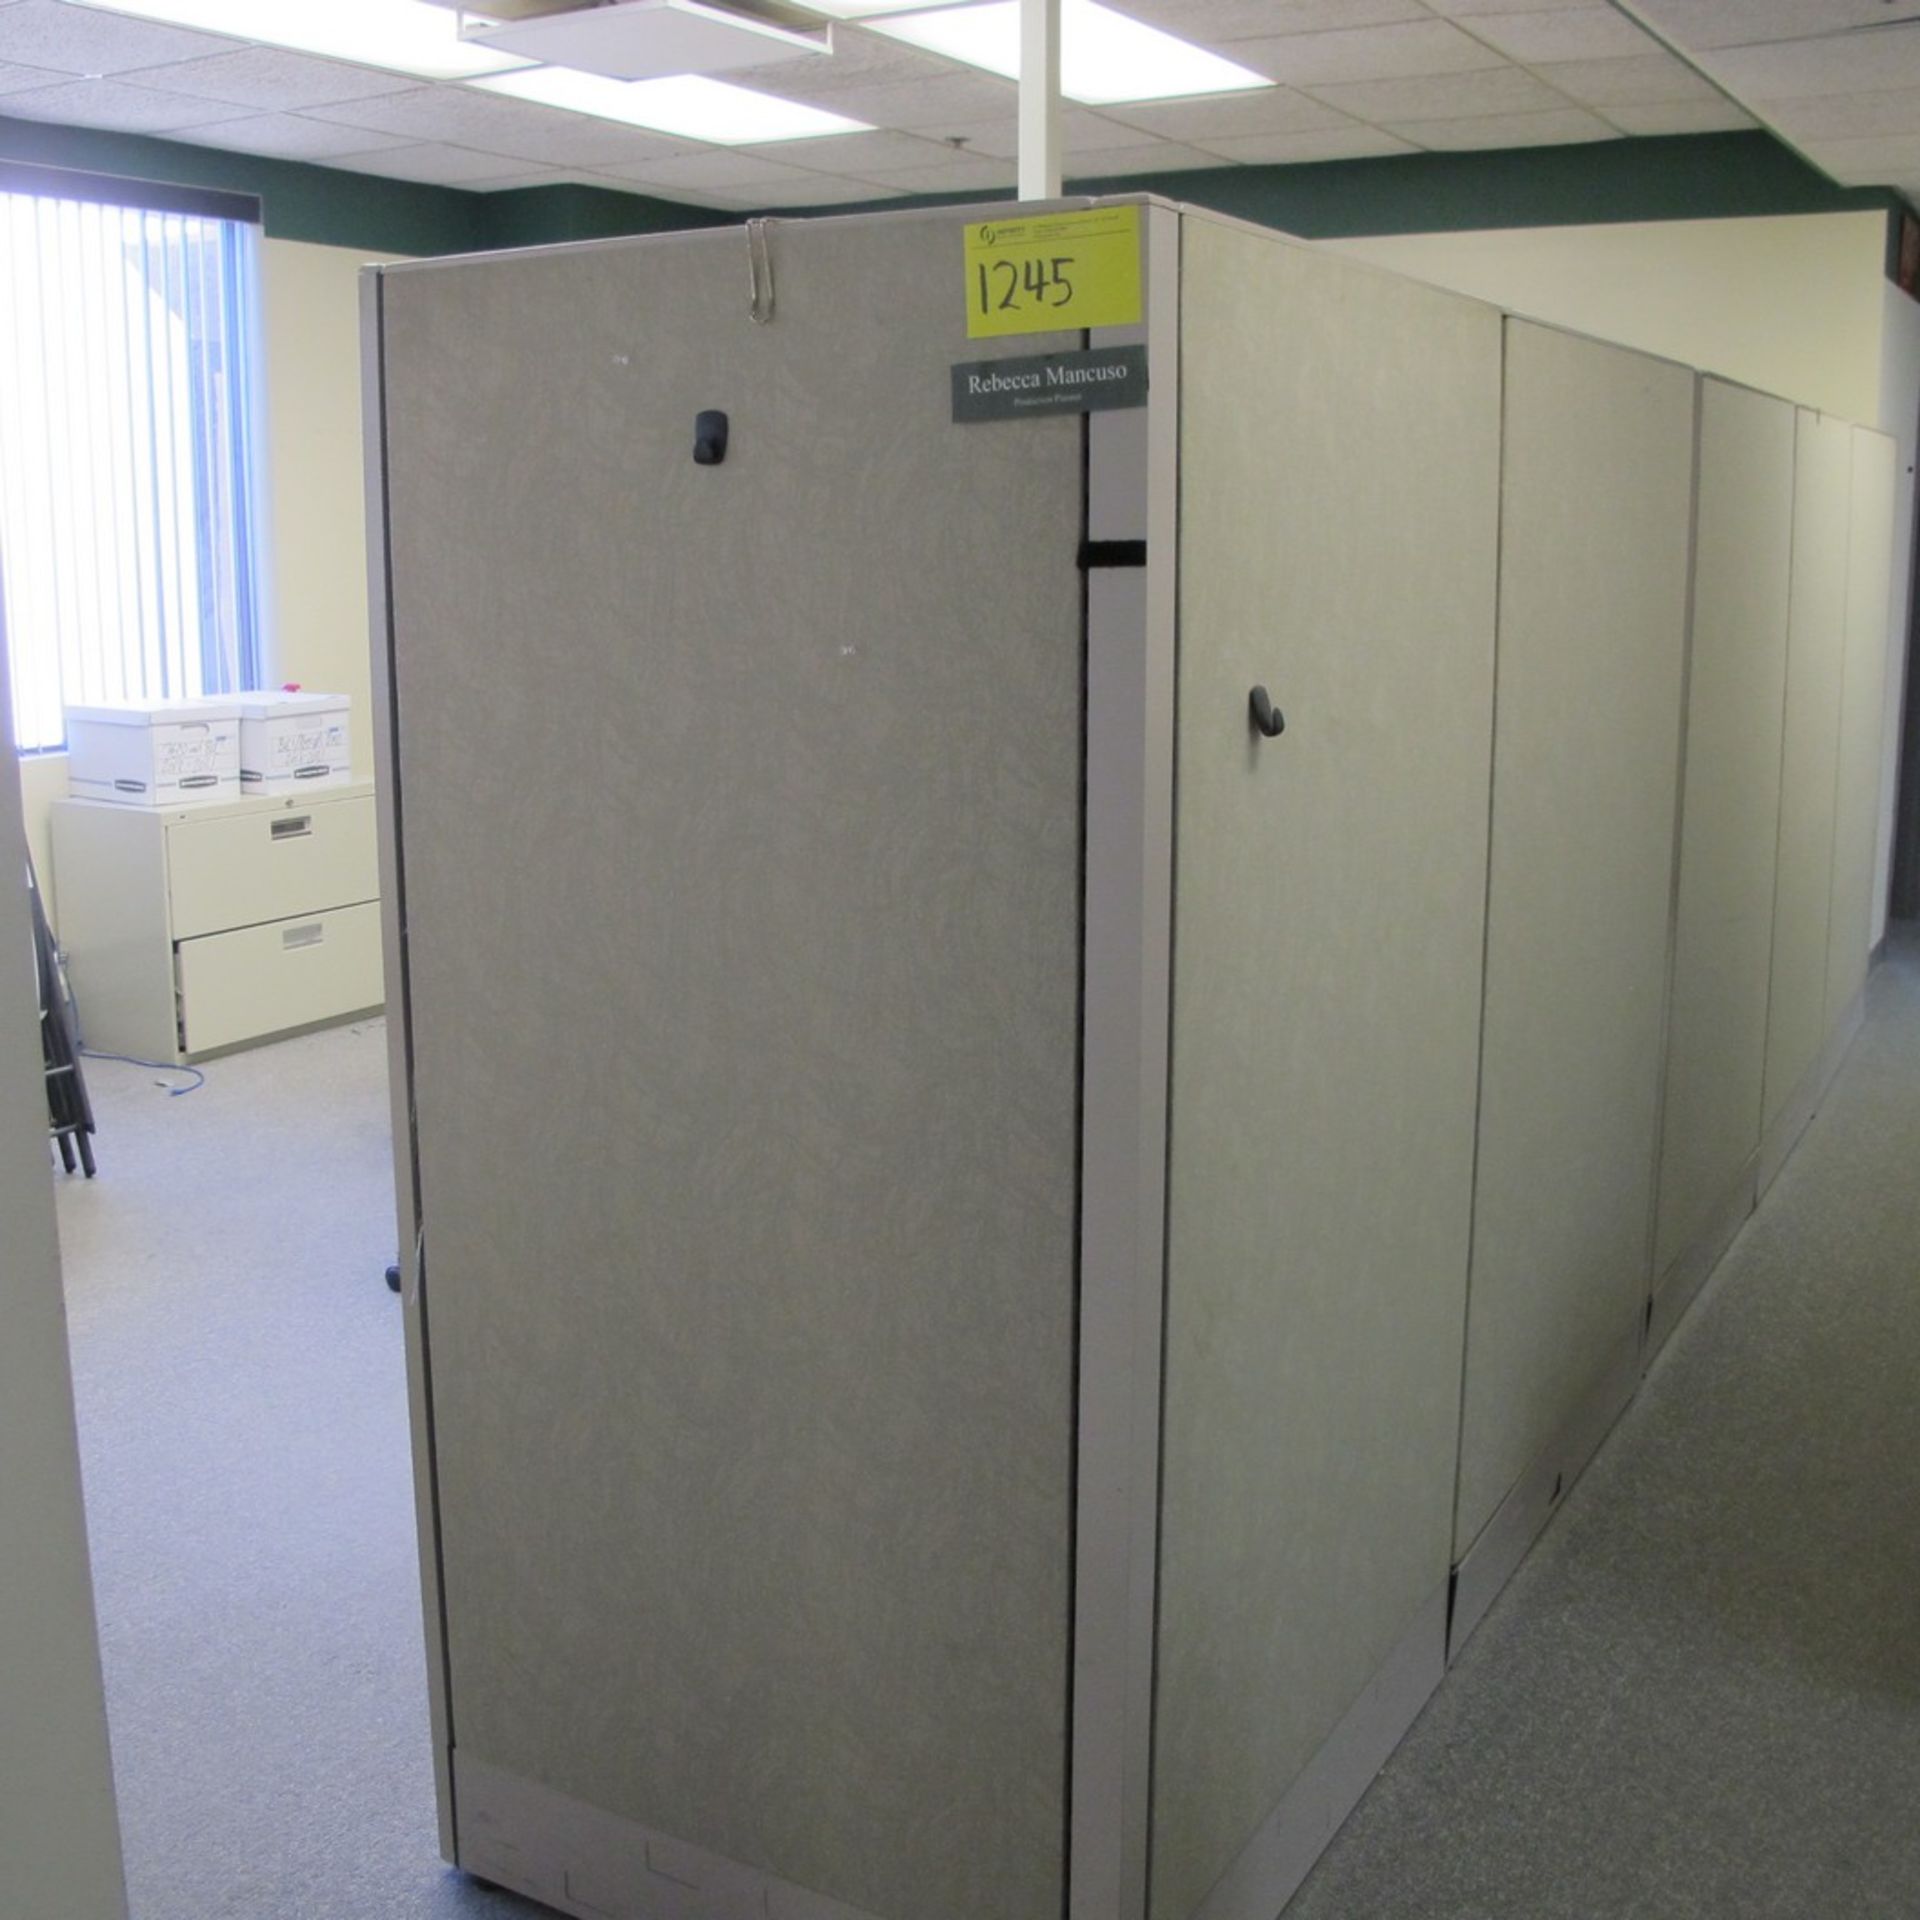 LOT OF 2-PERSON WORKSATION W/ DIVIDERS, UPPER CABINETS, DESKS, (5) FILE CABINETS, TABLE, SMALL DESK,